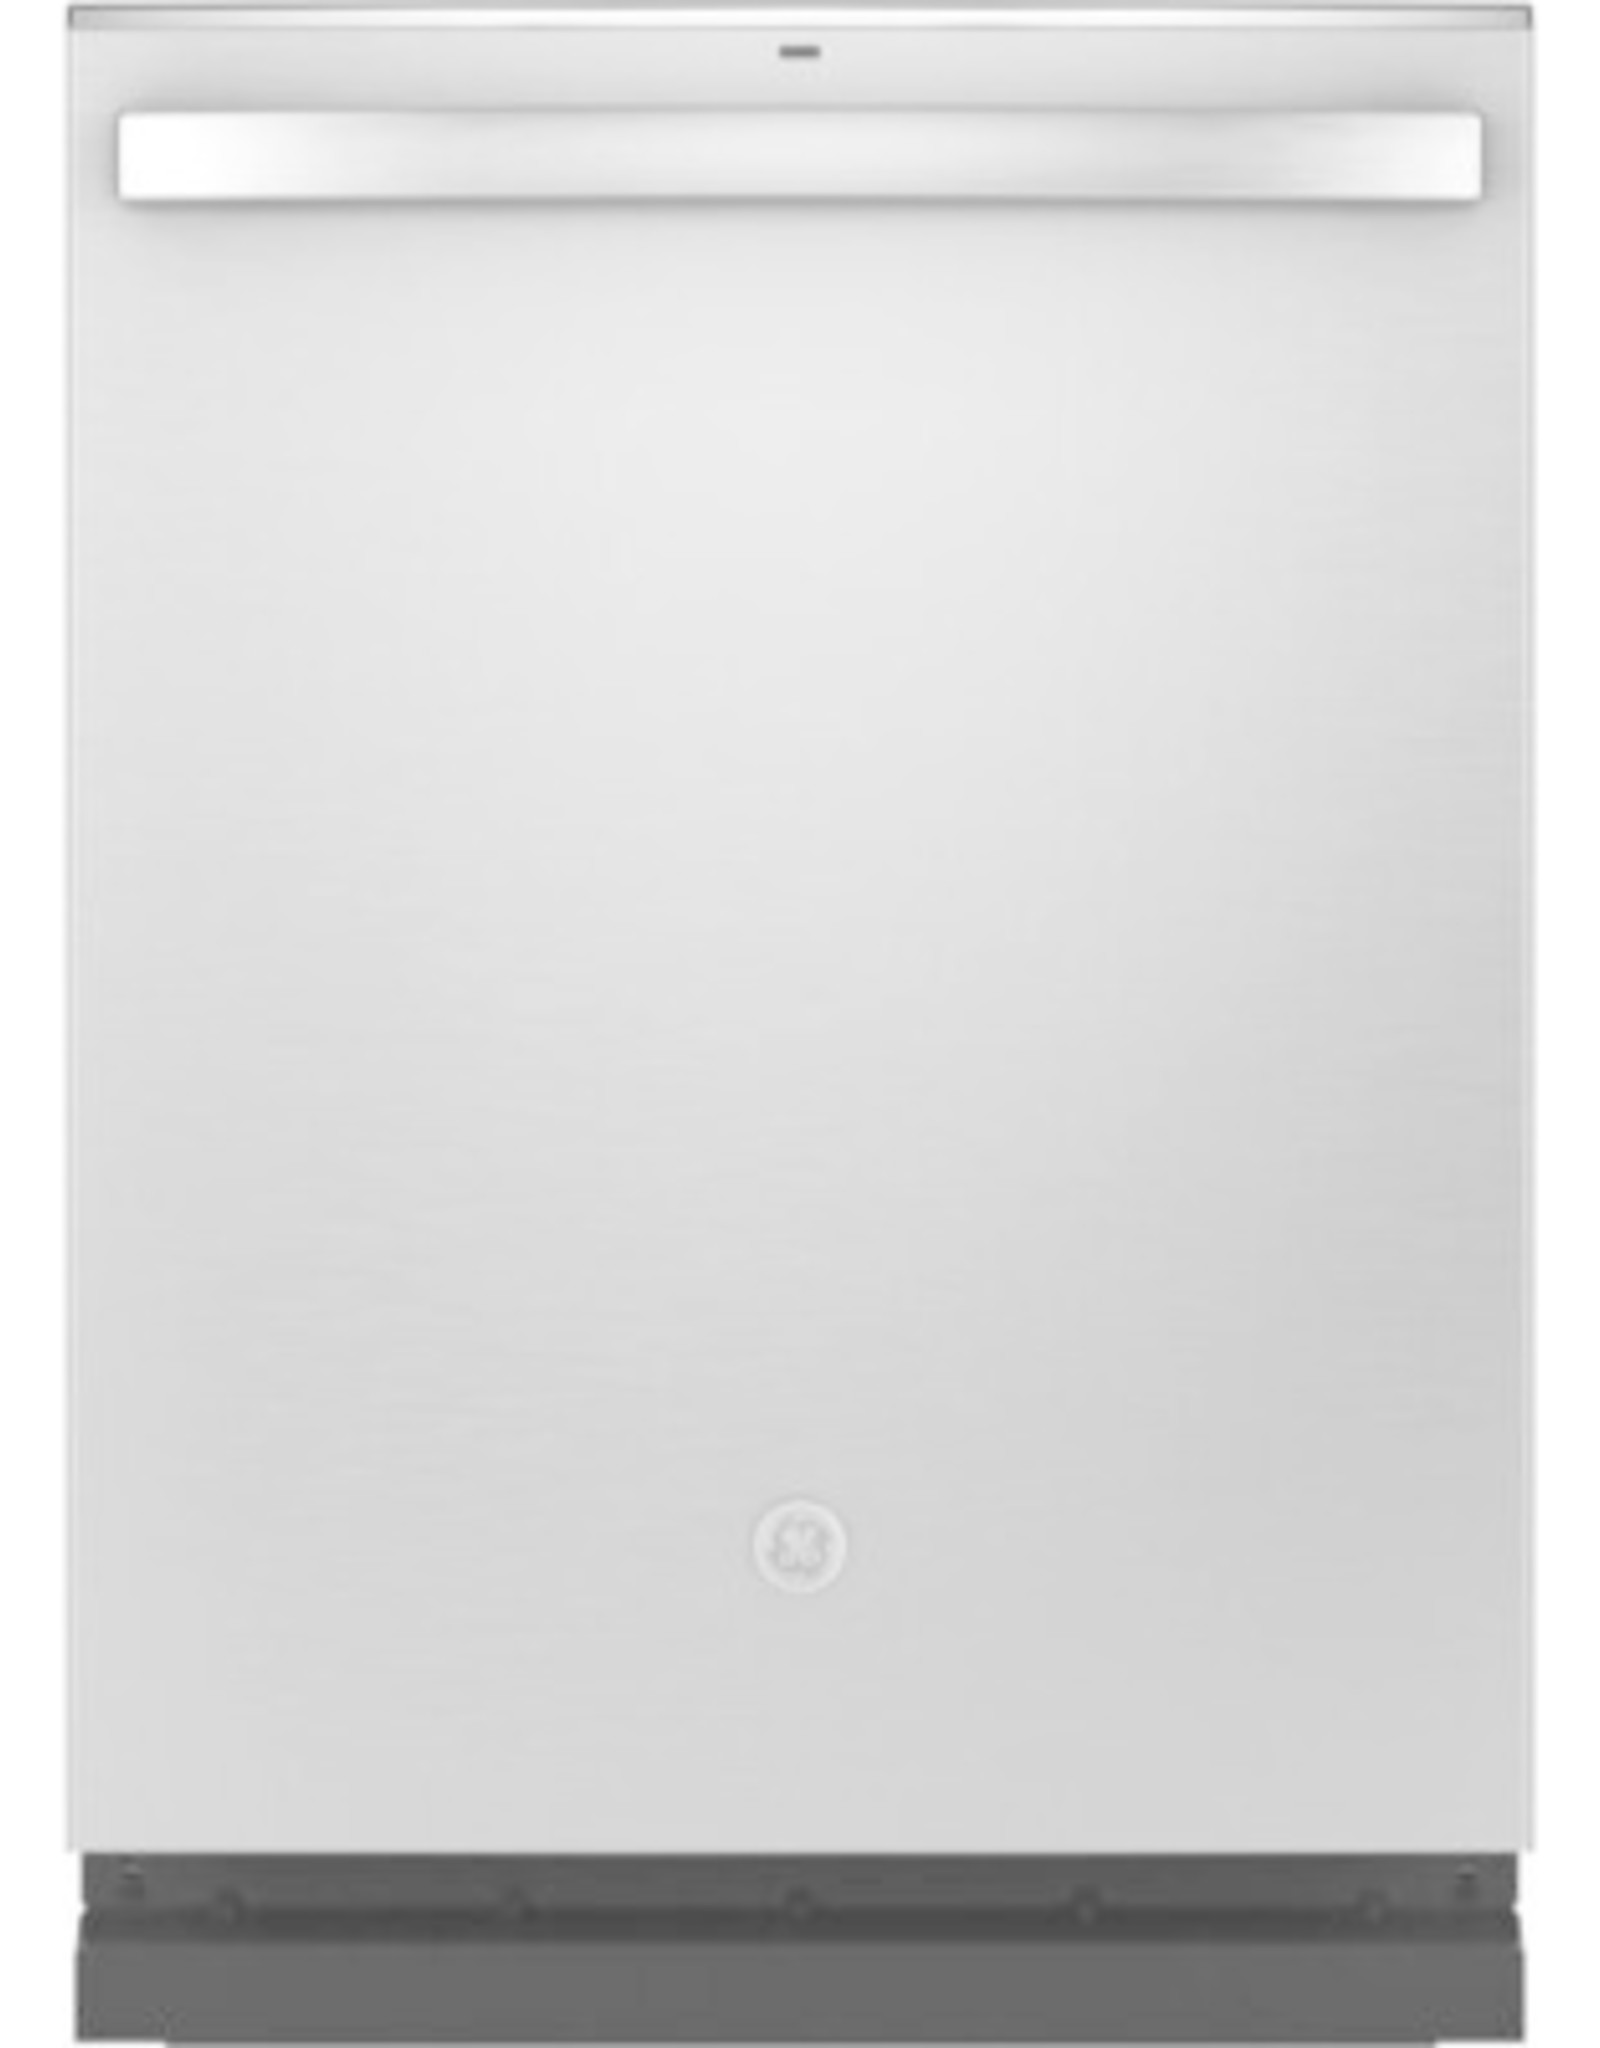 GE GE Profile Stainless Steel Interior Dishwasher with Hidden Controls